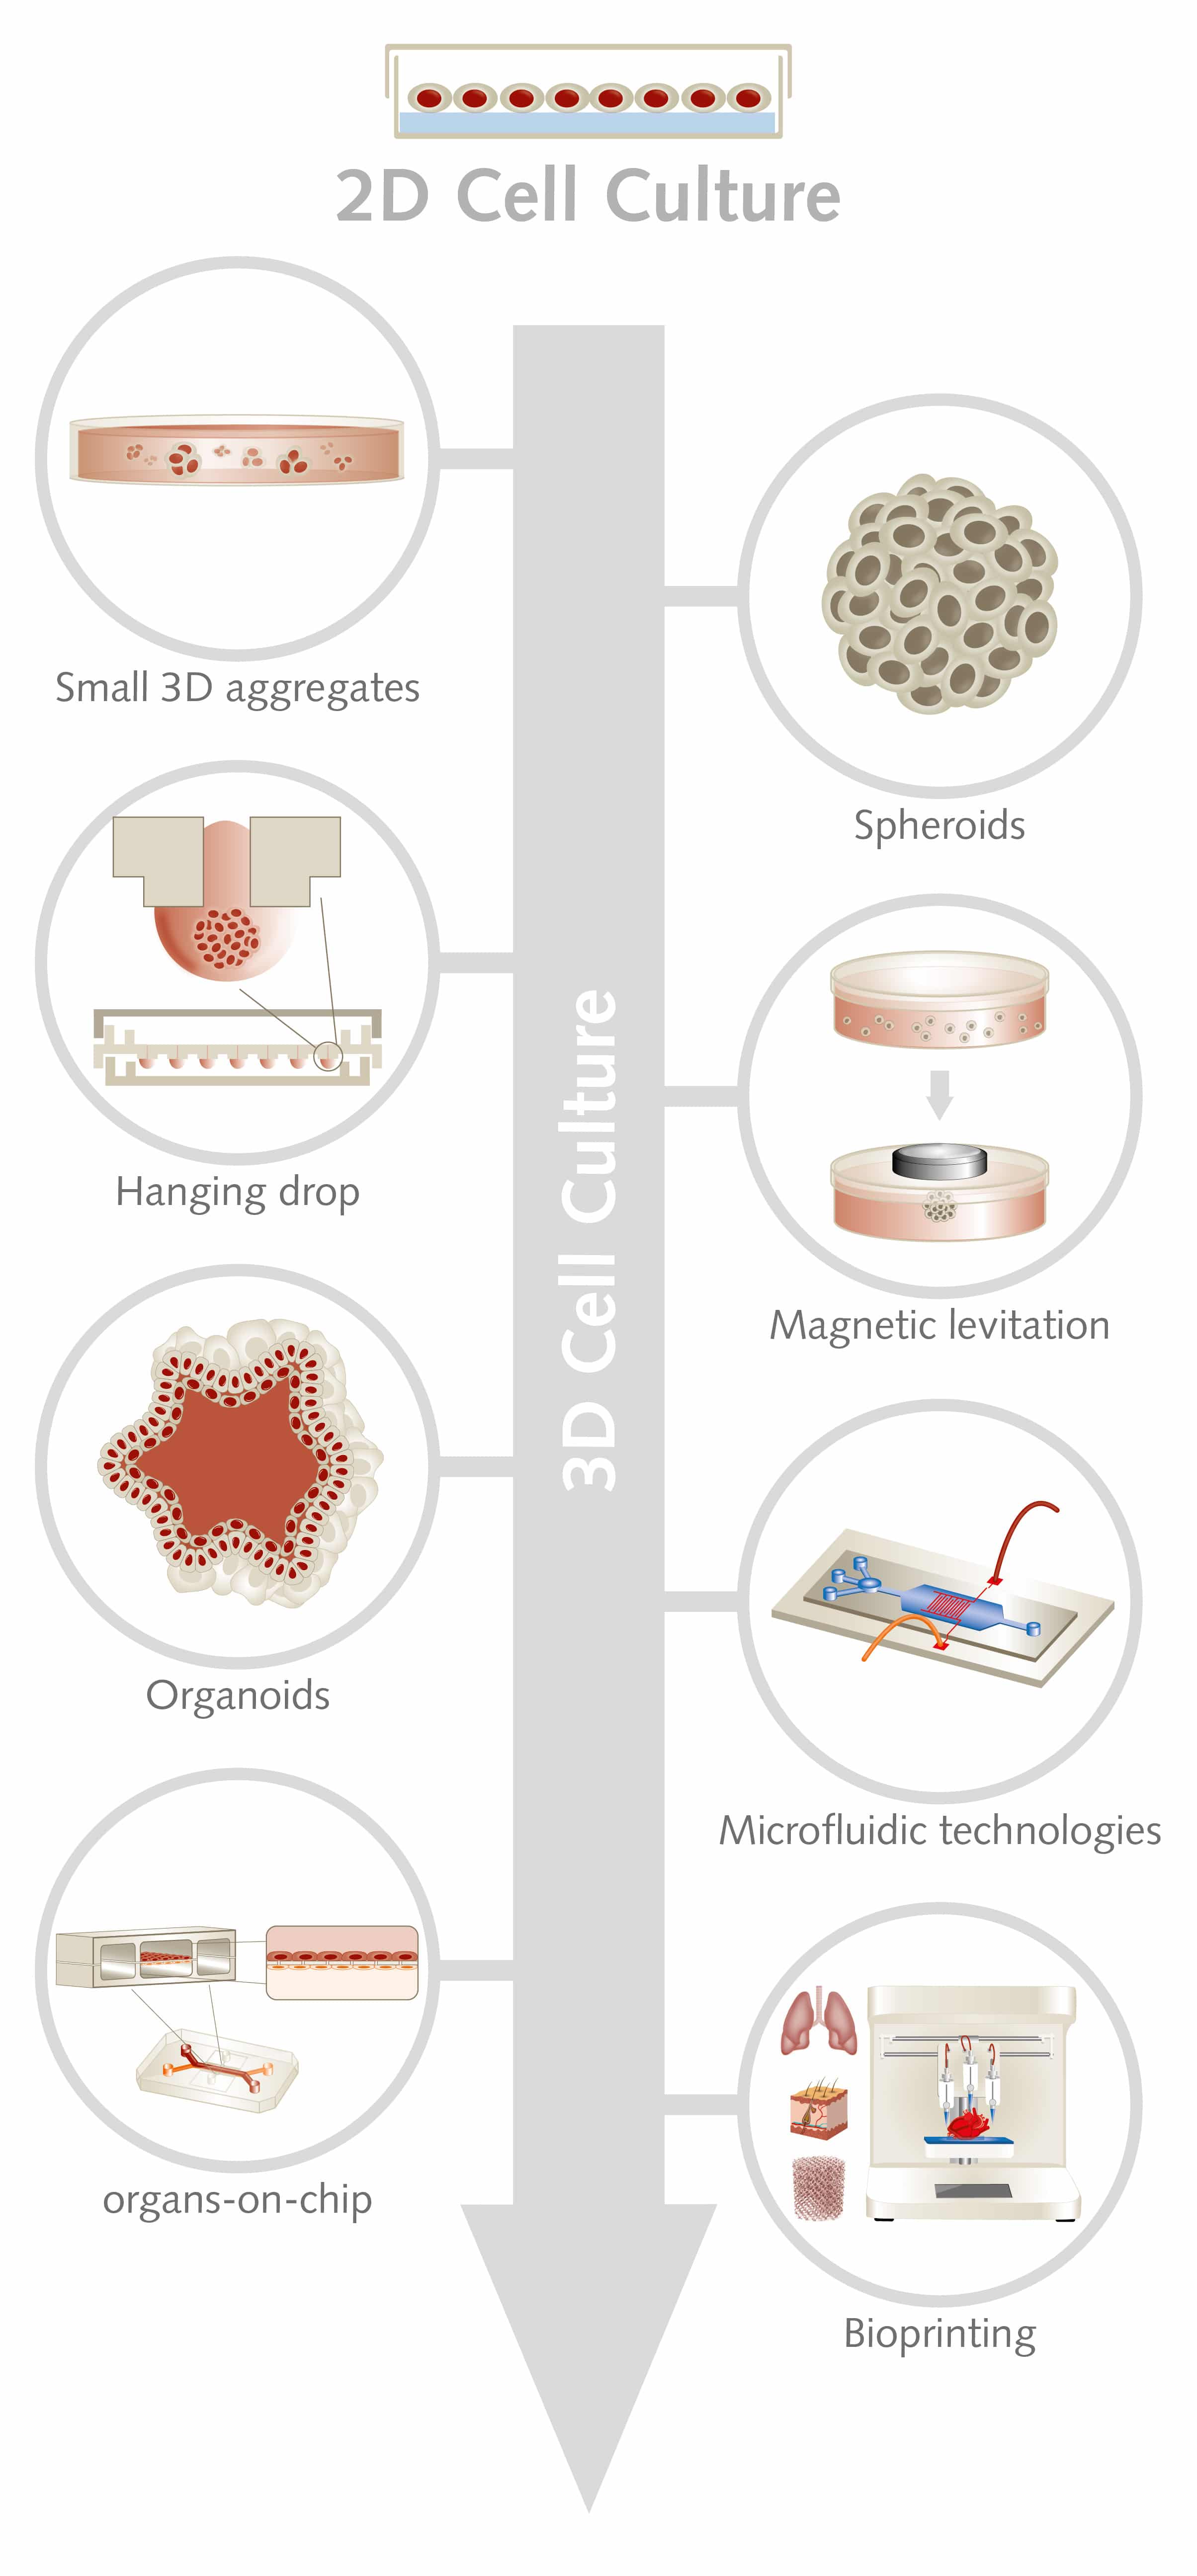 3D Cell Culture: Moving from simple technologies to sophisticated approaches